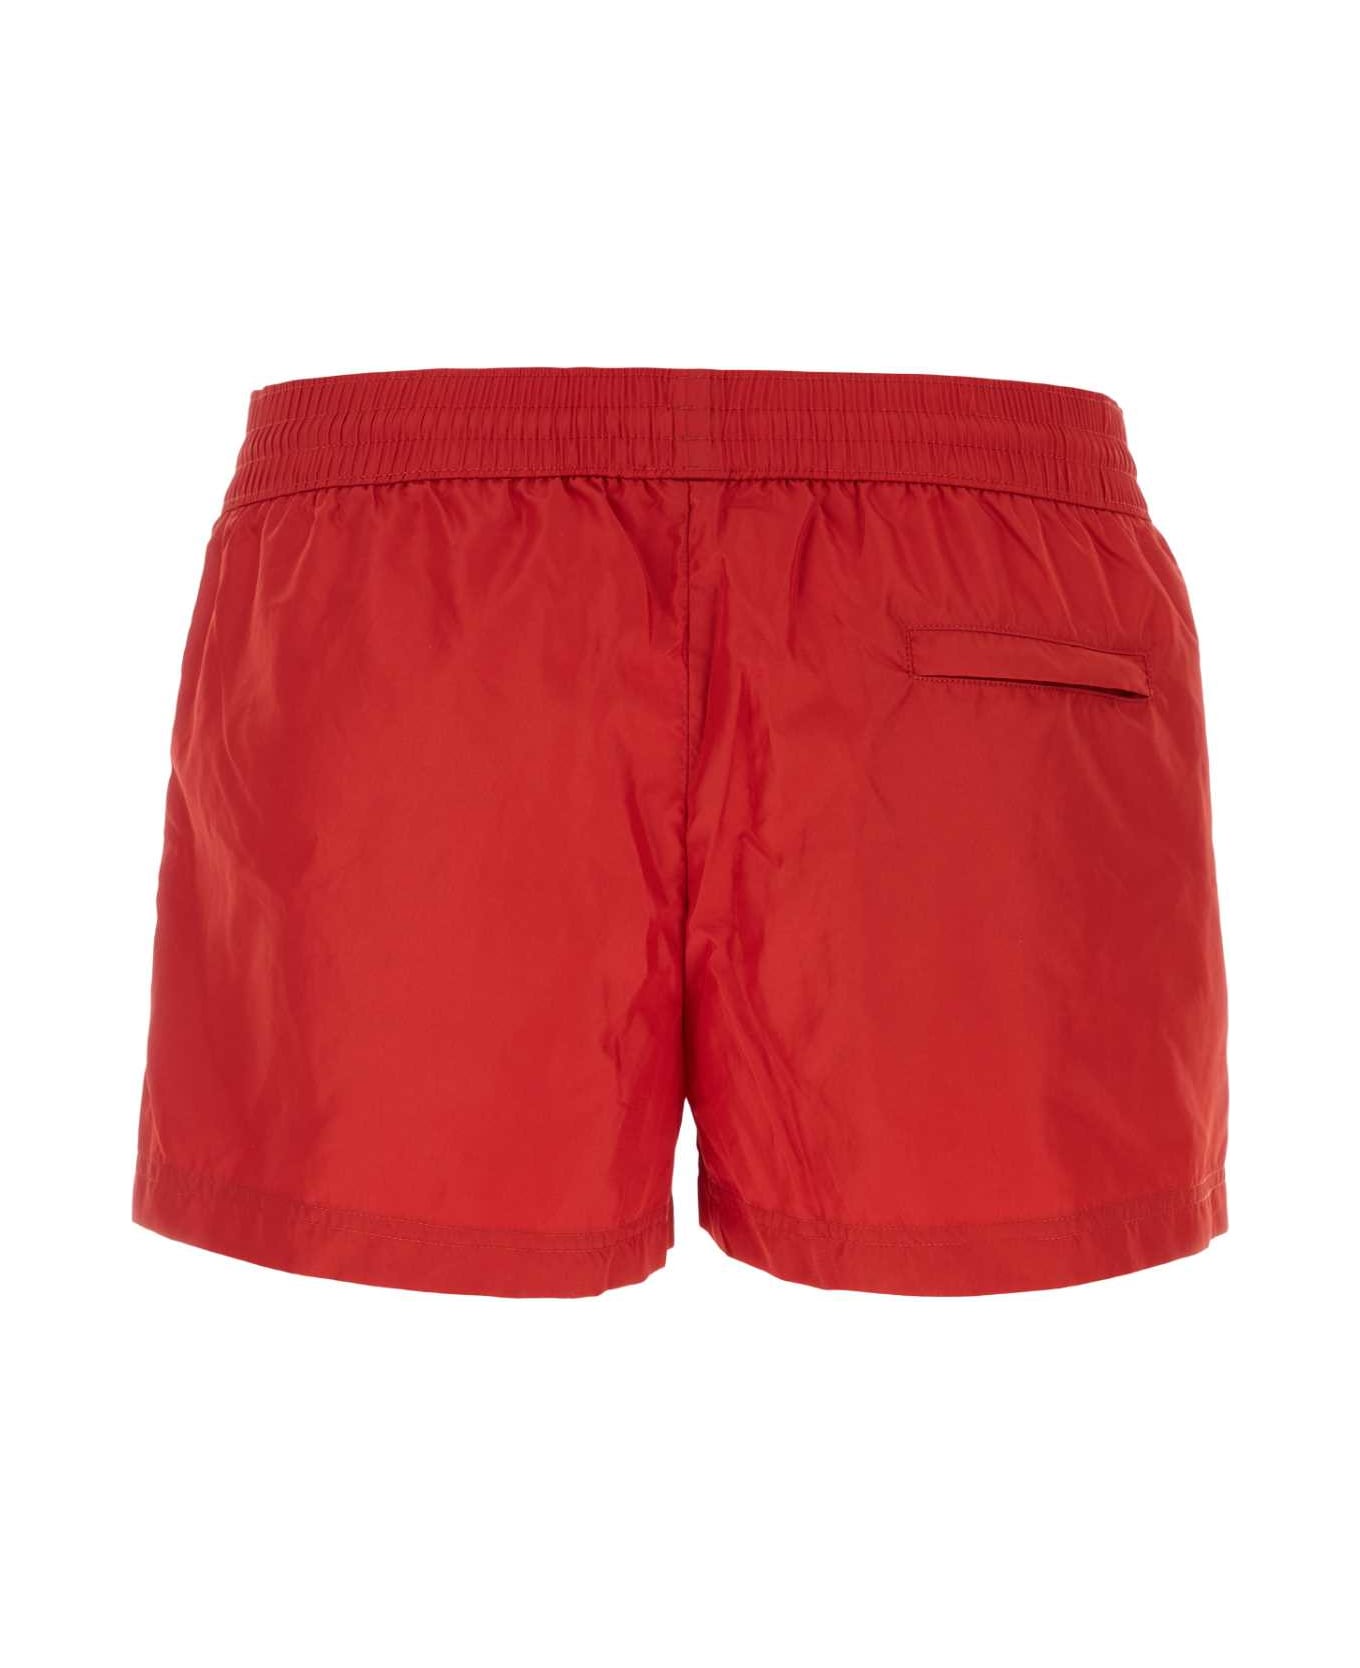 Dolce & Gabbana Red Polyester Swimming Shorts - R2254